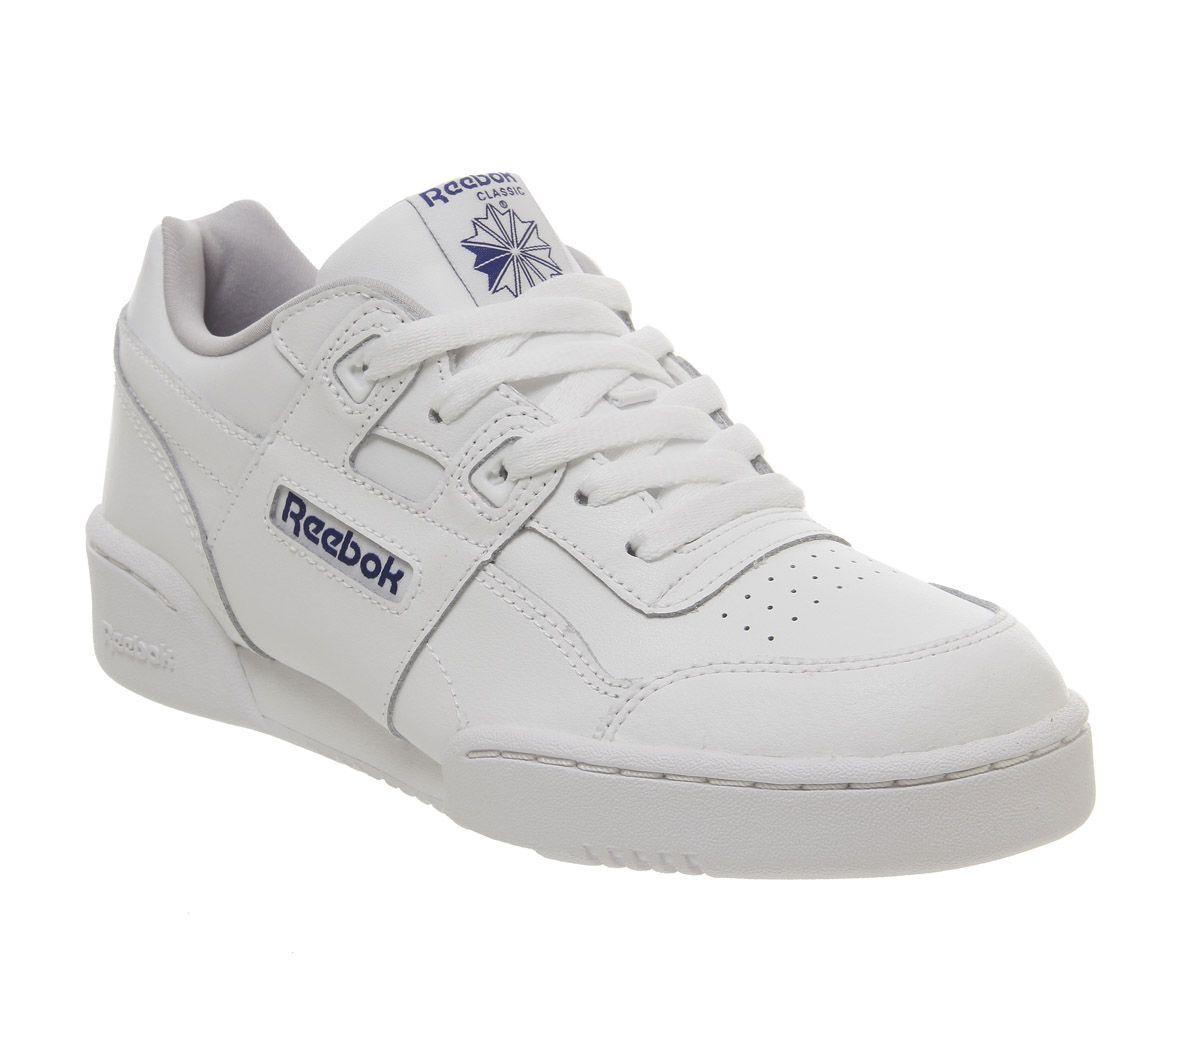 Reebok Leather Workout Gs Trainers in 